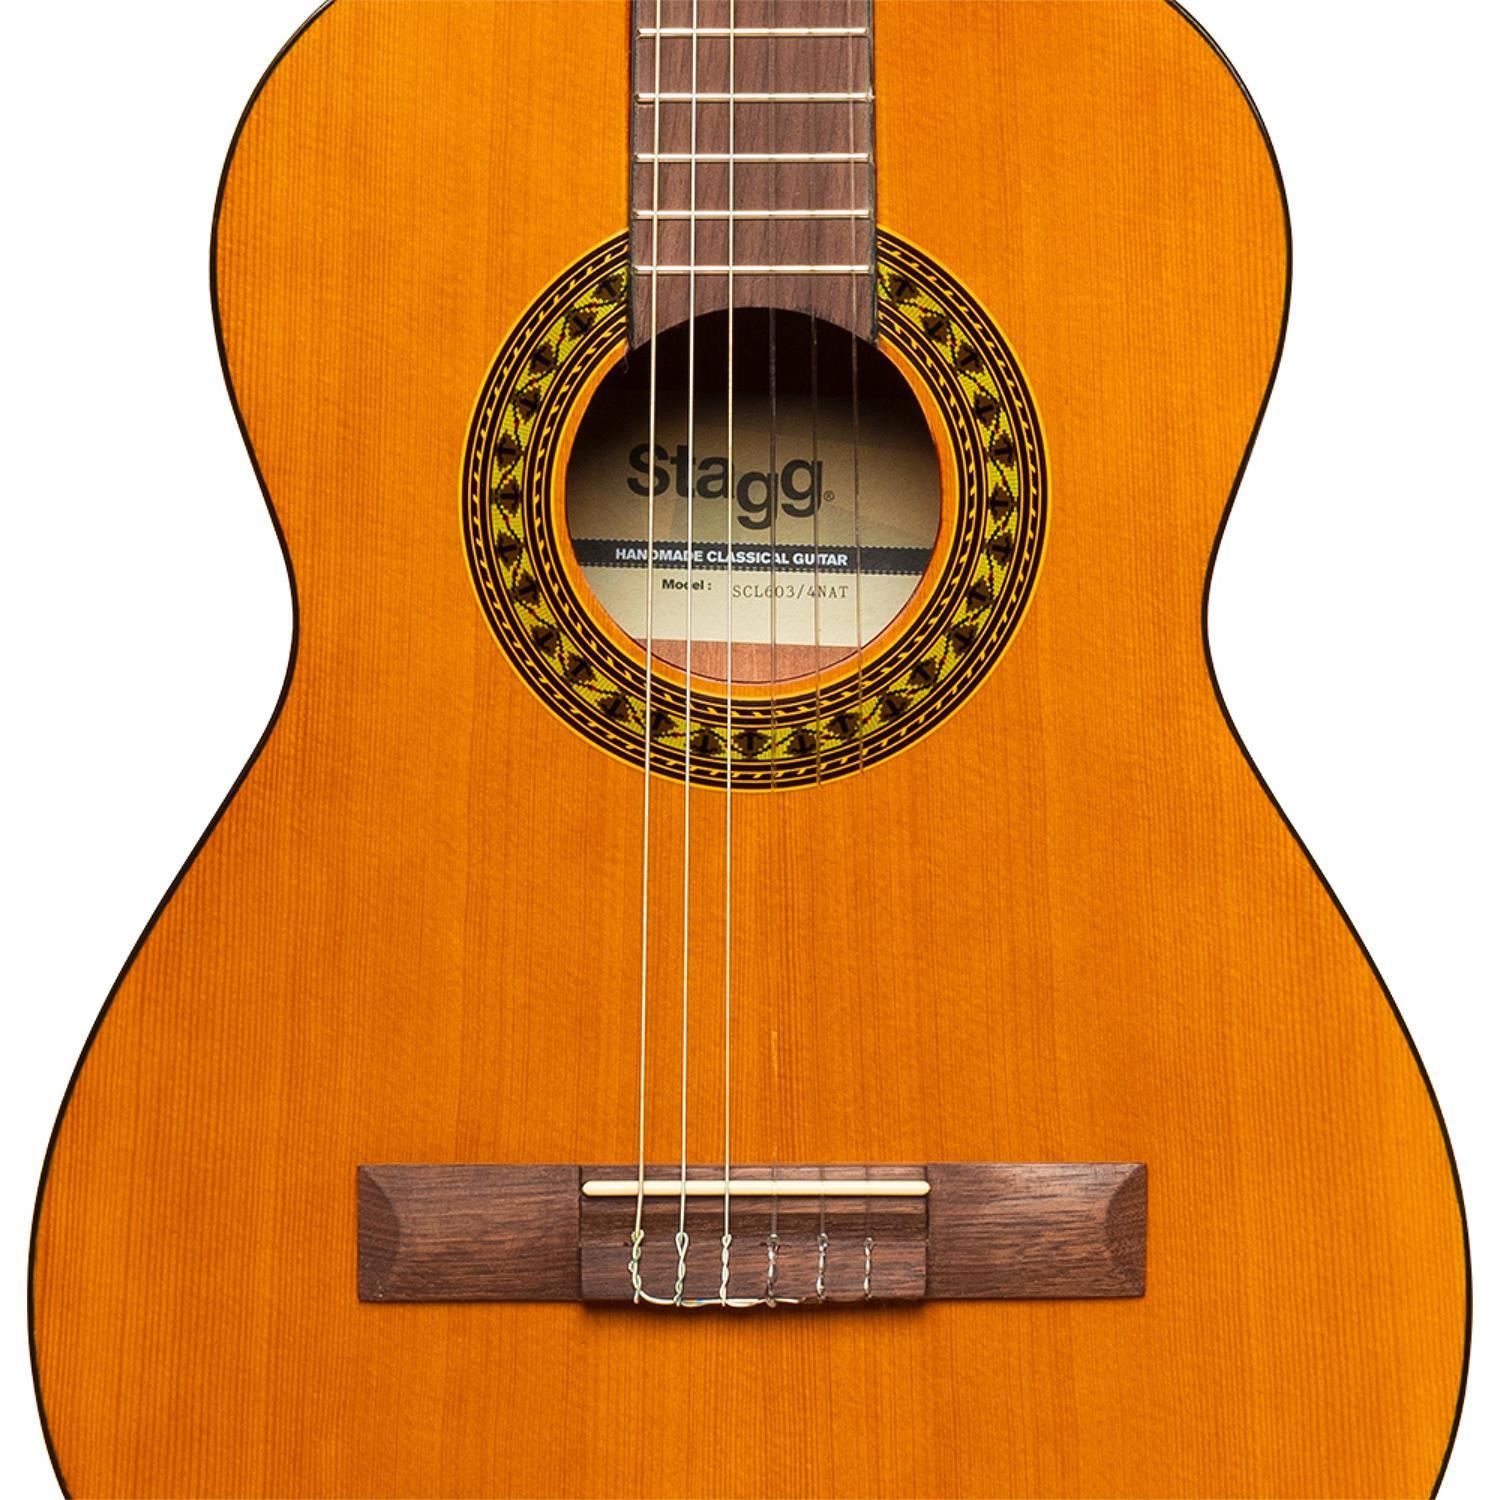 Stagg SCL60 3/4-NAT Classical Guitar with spruce top - DY Pro Audio